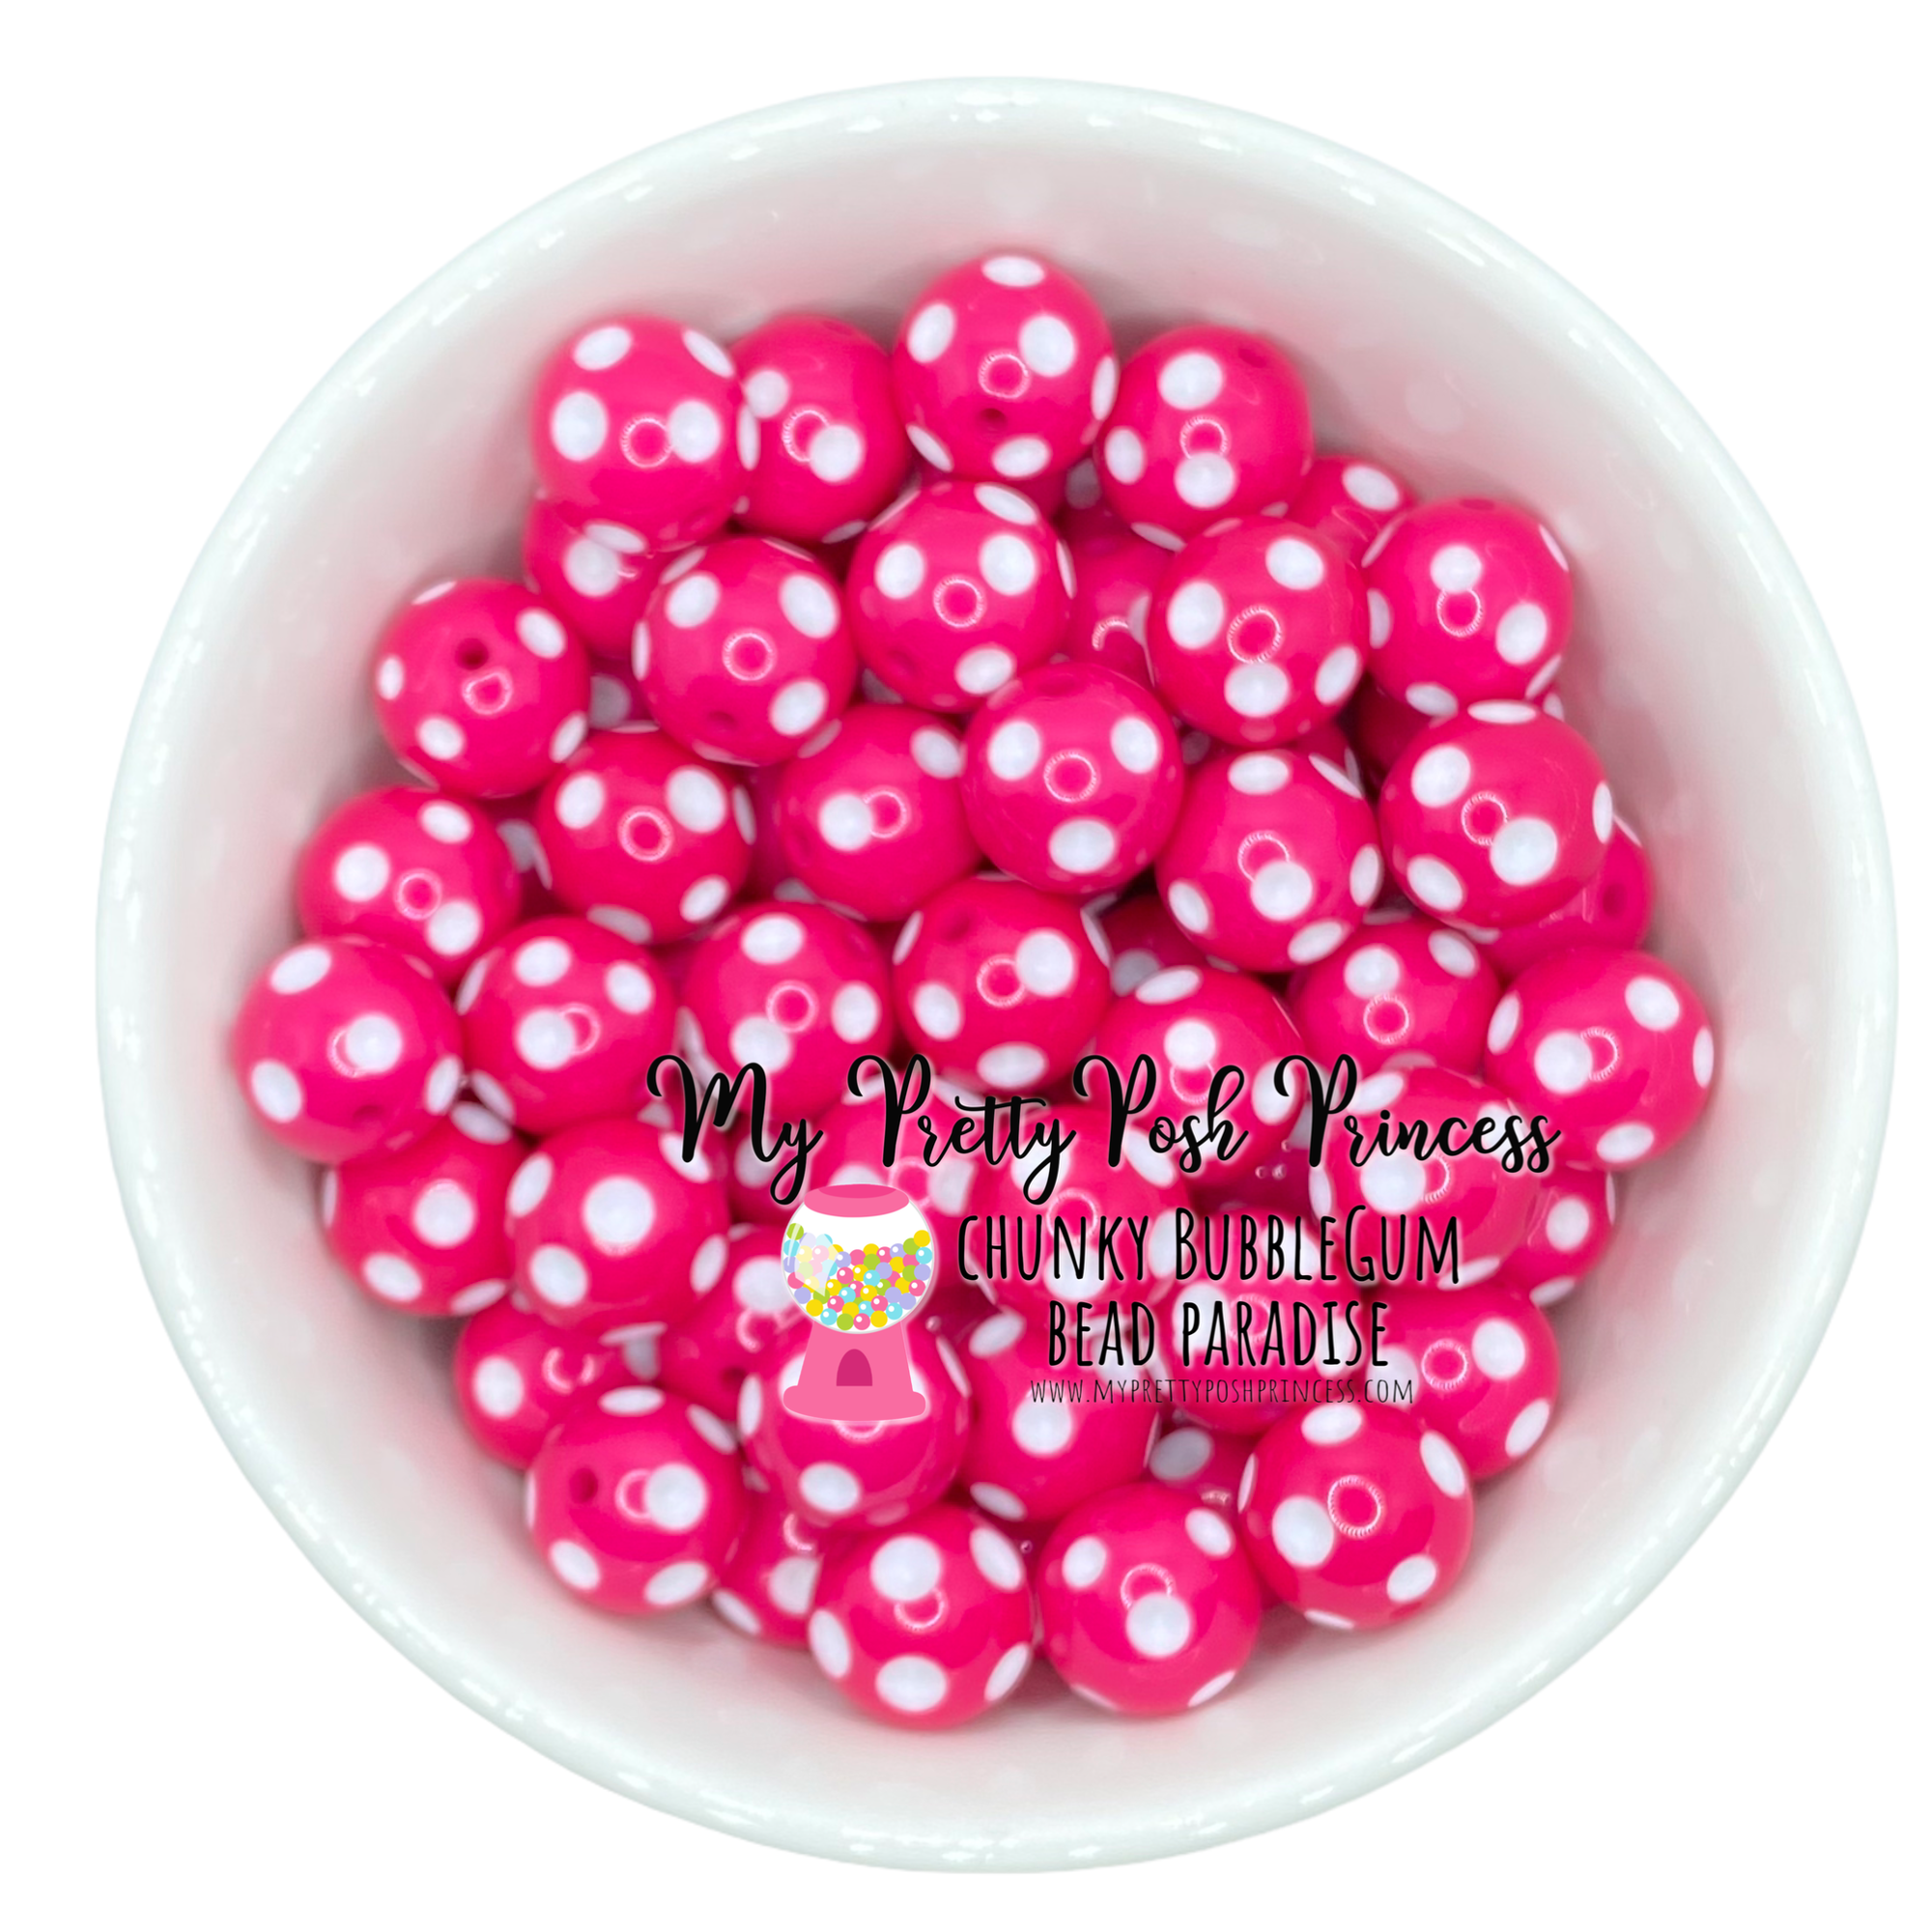 d28- 12mm Posh Pink Polka Dots Acrylic Bubble Gum Chunky Beads (20 Count)